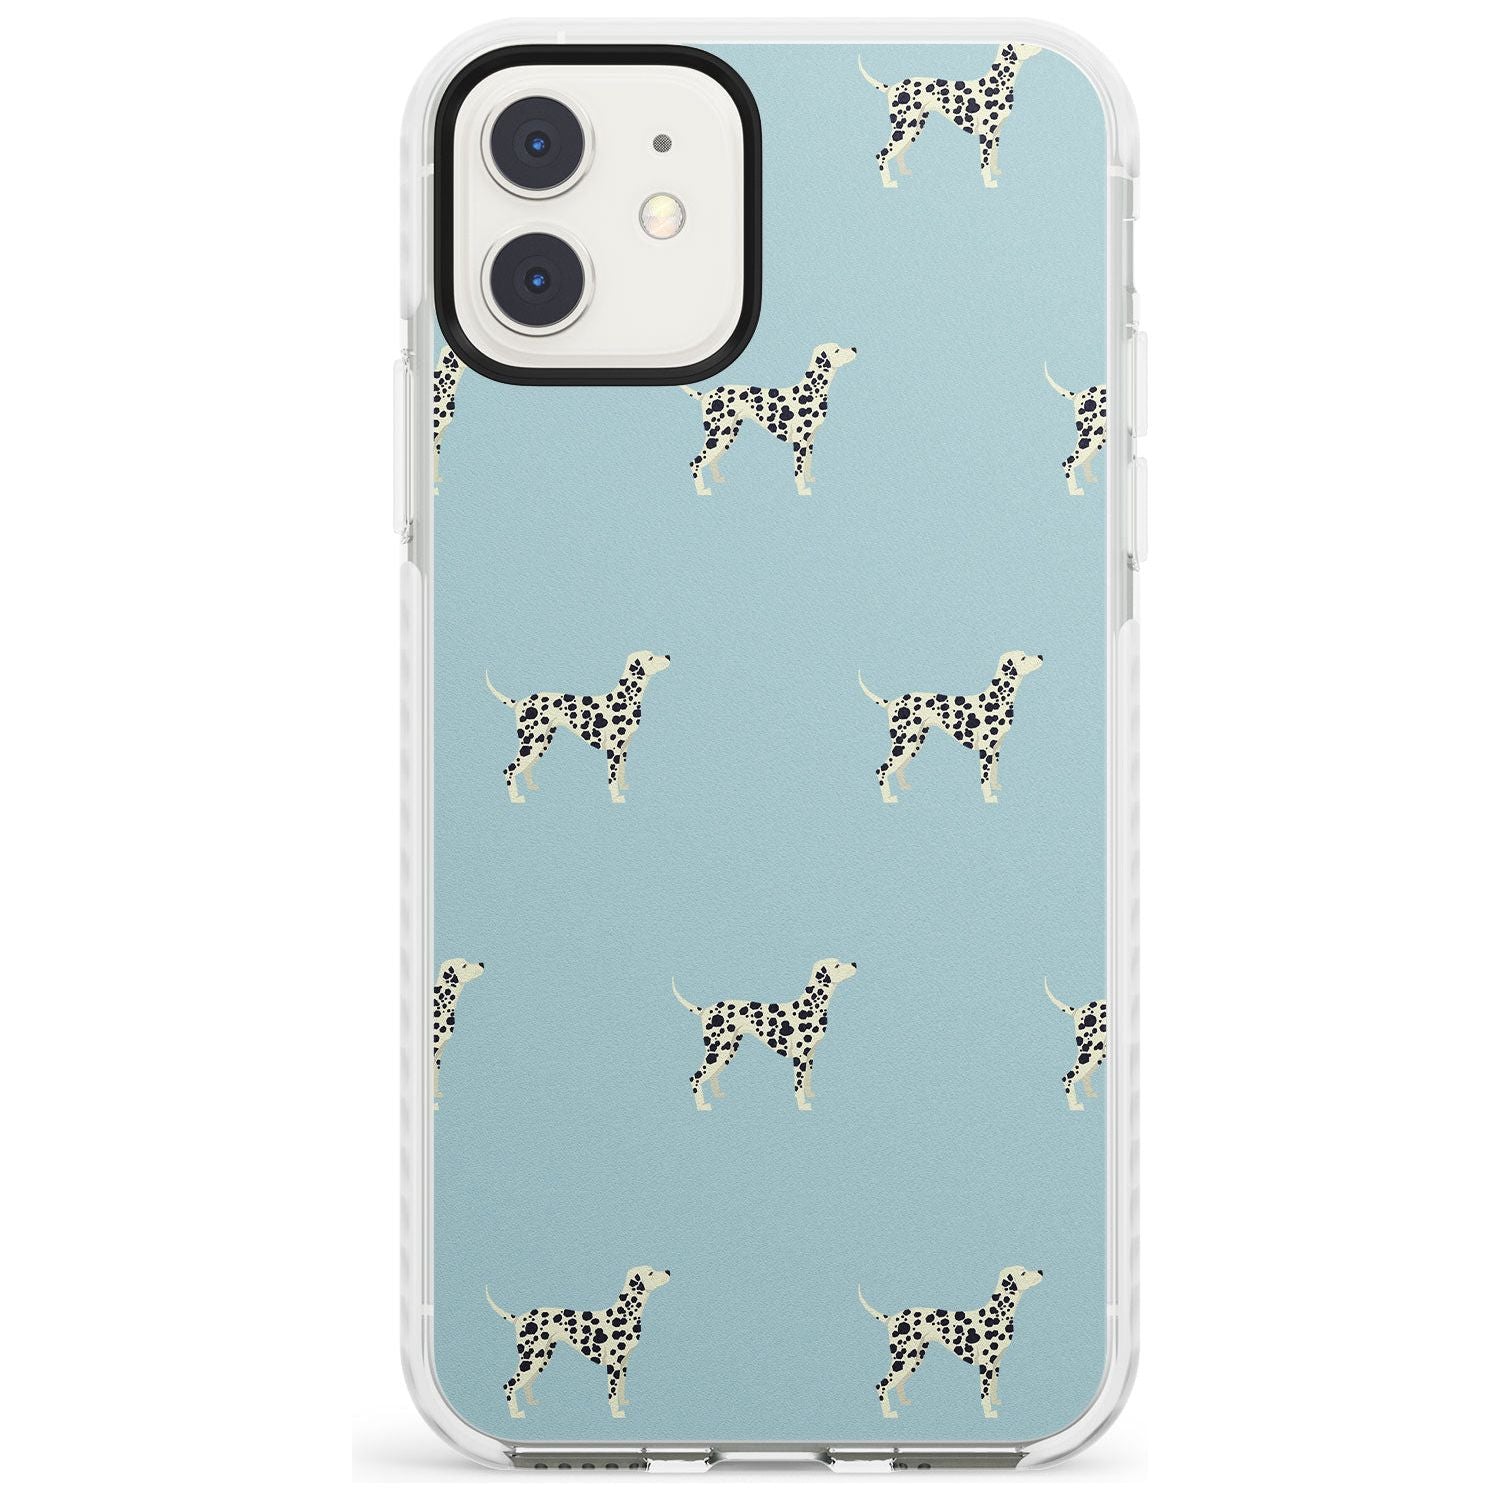 Dalmation Dog Pattern Impact Phone Case for iPhone 11